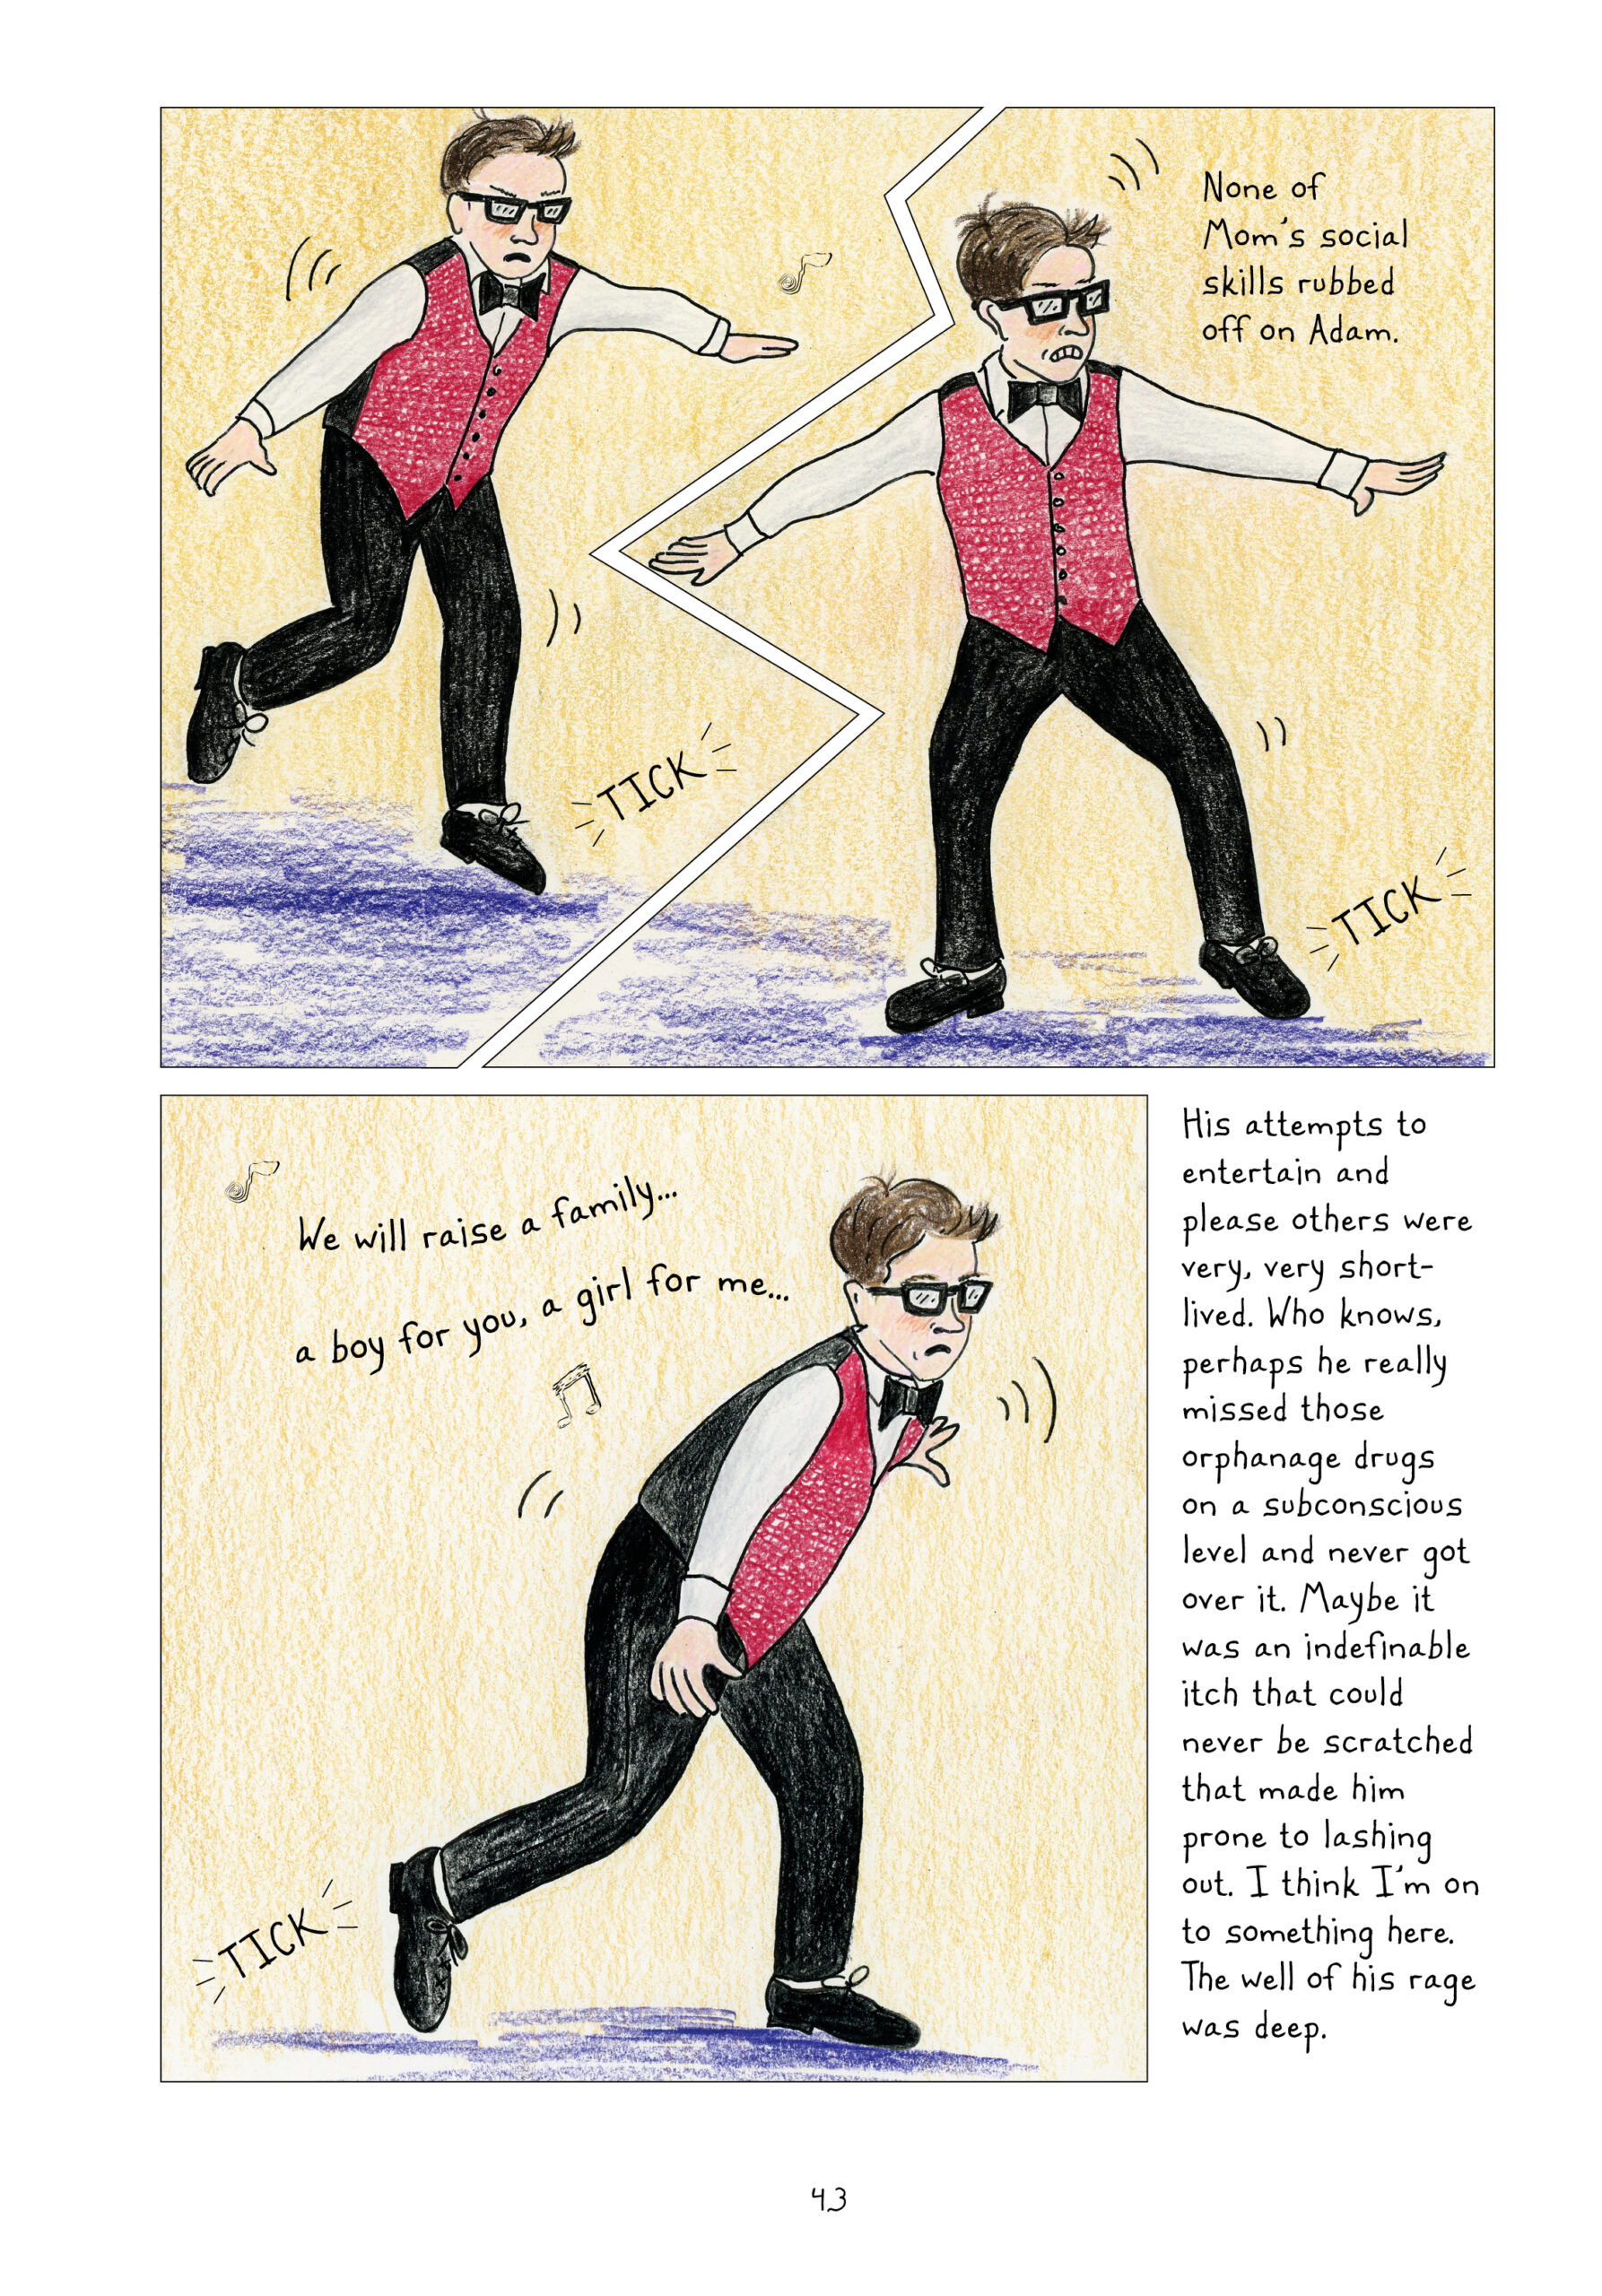 Lynn's brother Adam, as a boy, wears a red vest and black bowtie over a white button-down and black pants. He has on his signature thick, square glasses. He is attempting to tap dance. He looks off balance and awkward. He grimaces. 

"None of Mom's social skills rubbed off on Adam."

Music plays at Adam continues dancing uncomfortably: "We will raise a family... a boy for you, a girl for me..."

Lynn continues narrating, "His attempts to entertain and please others were very, very short-lived. Who knows, perhaps he really missed those orphanage drugs on a subconscious level and never got over it. Maybe it was an indefinable itch that could never be scratched that made him prone to lashing out. I think I'm onto something here. The well of his rage was deep."